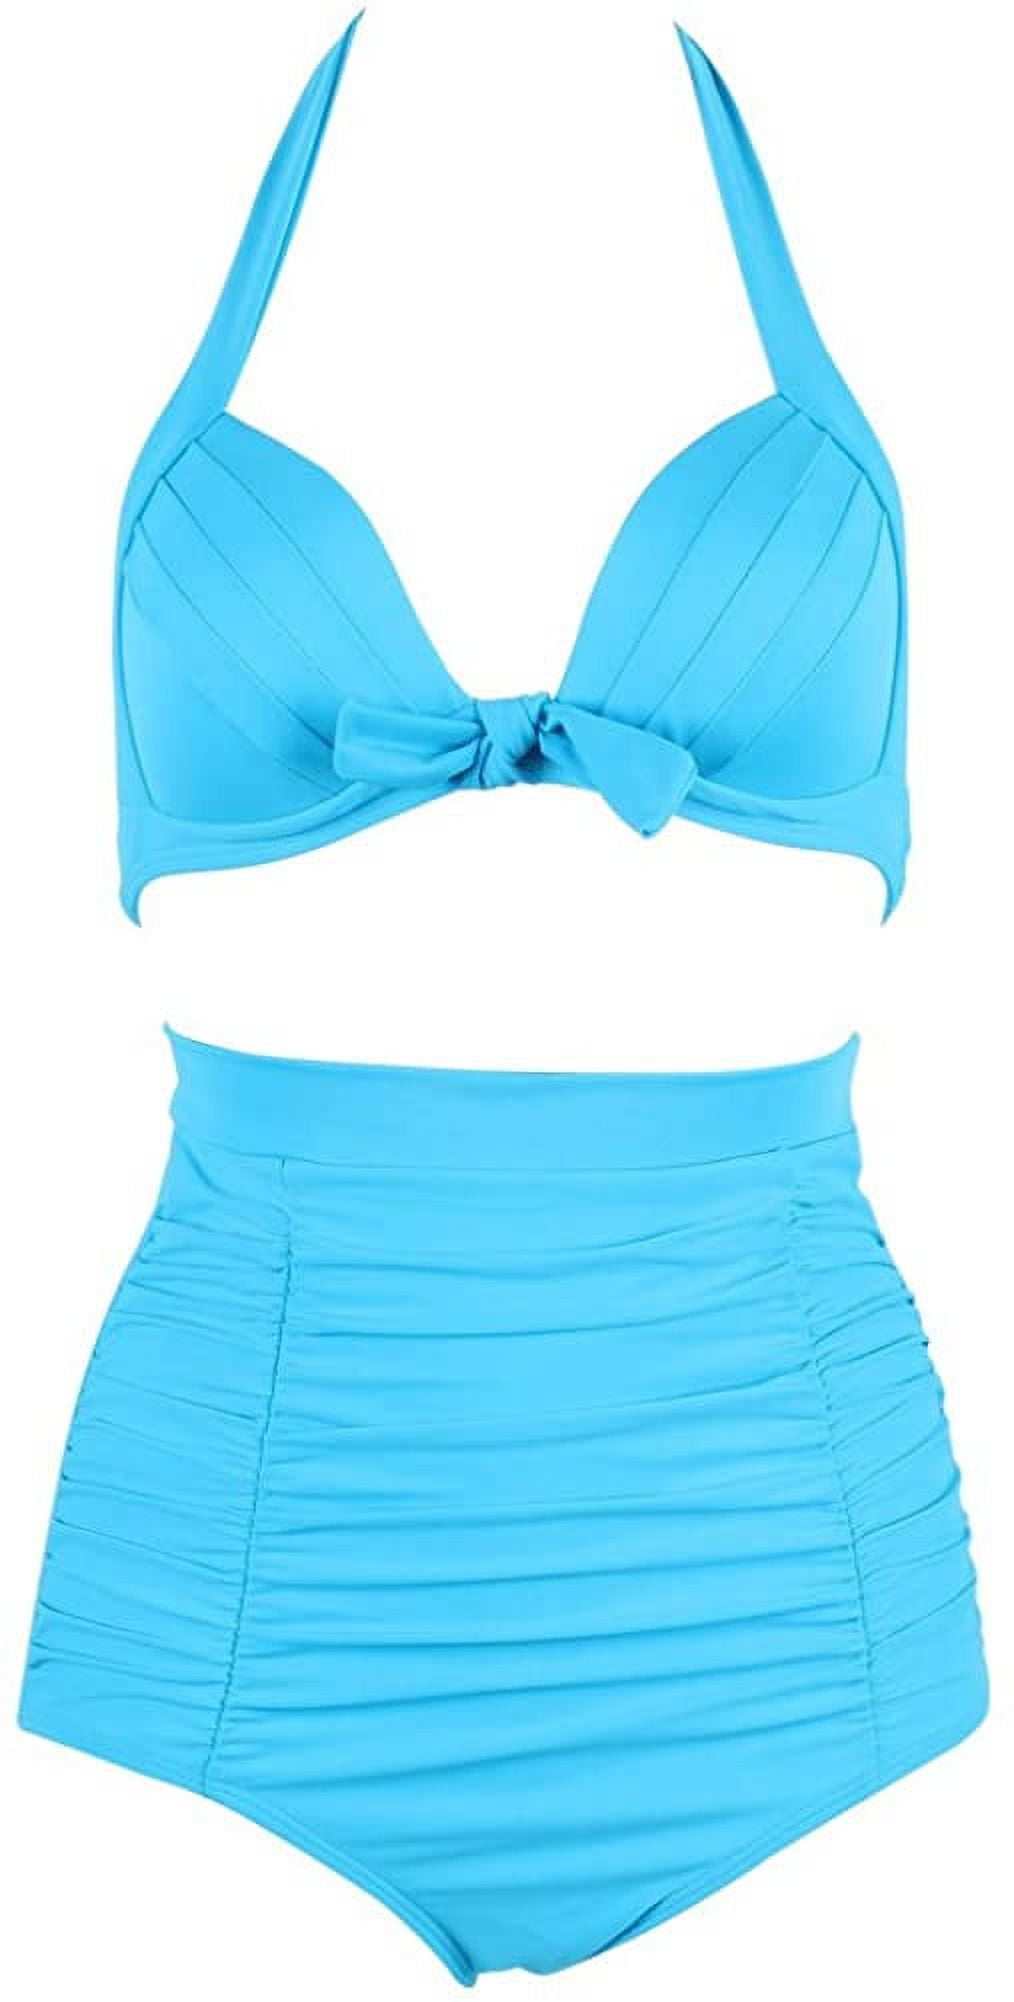 Women's 50s Vintage Retro Two Piece High Waisted Carnival Bikini Swimsuit  TEAL M 